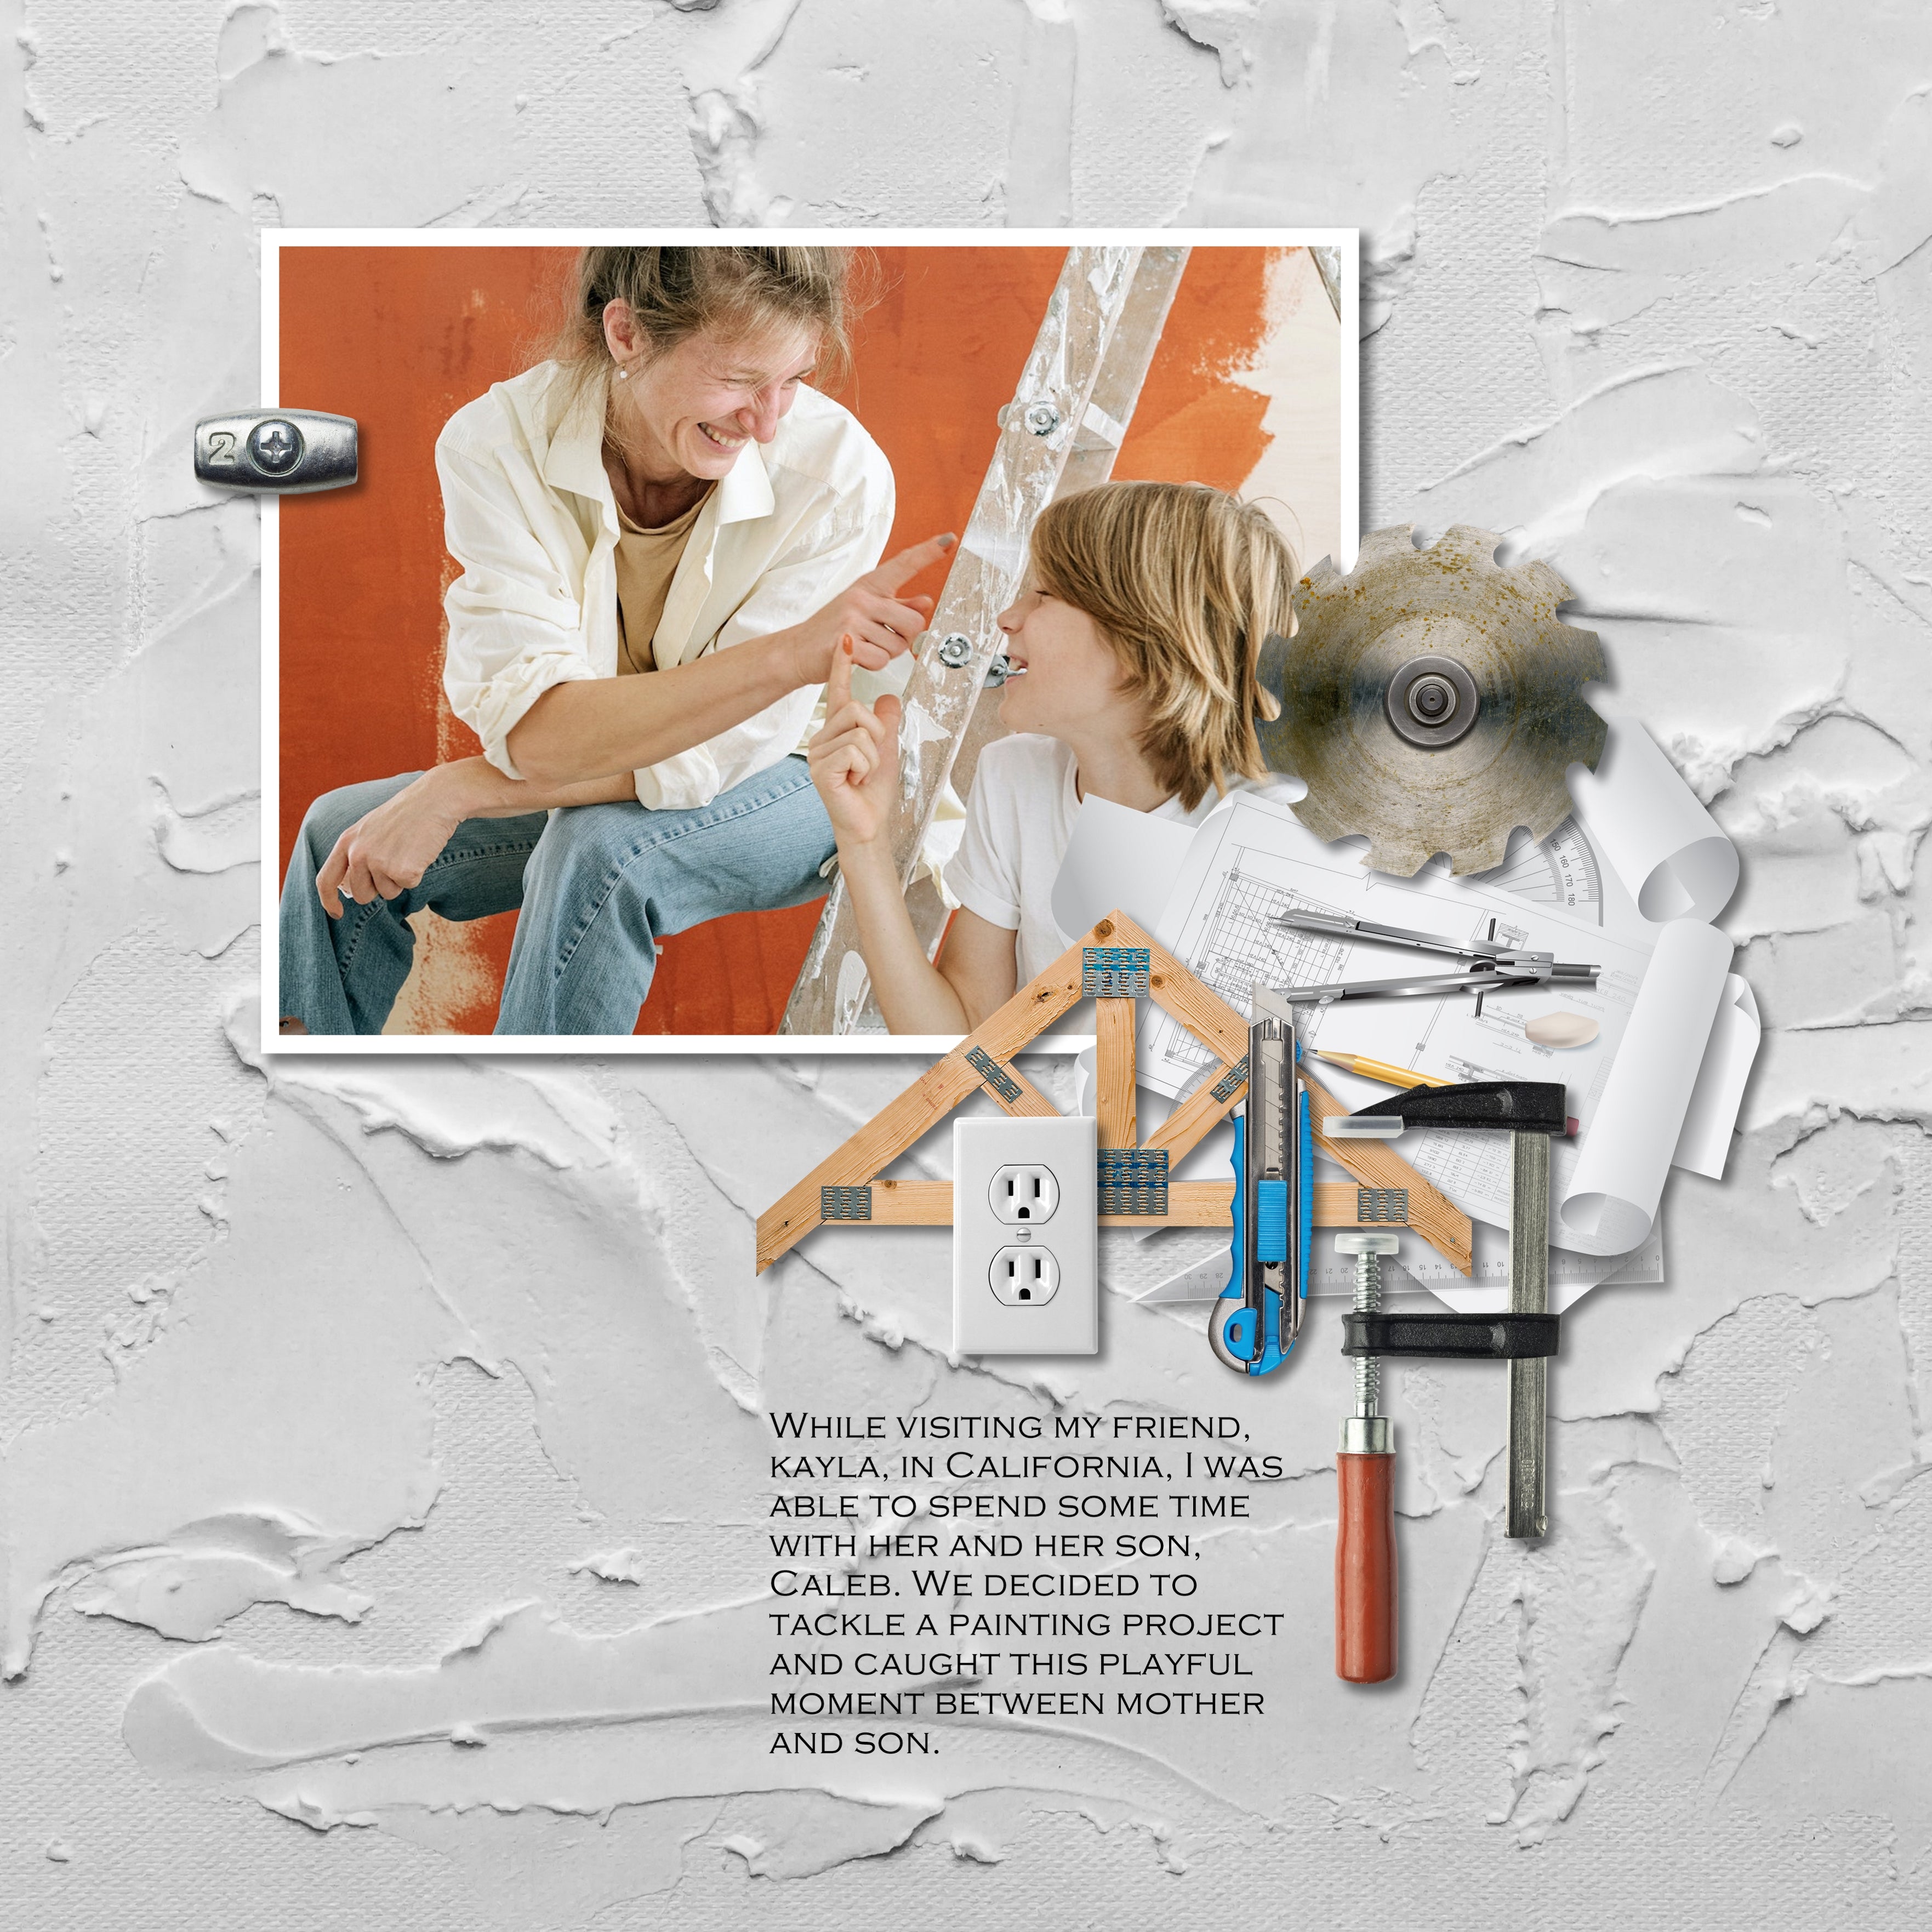 Get ready for some home improvement and remodeling with this Home Renovation kit featuring realistic digital art embellishments and versatile papers. Perfect for documenting building a new home, renovations around your house, house painting, interior decorating, handyman work, architects, interior designers, plumbers, electricians, draftsmen, construction, builder, and more. 